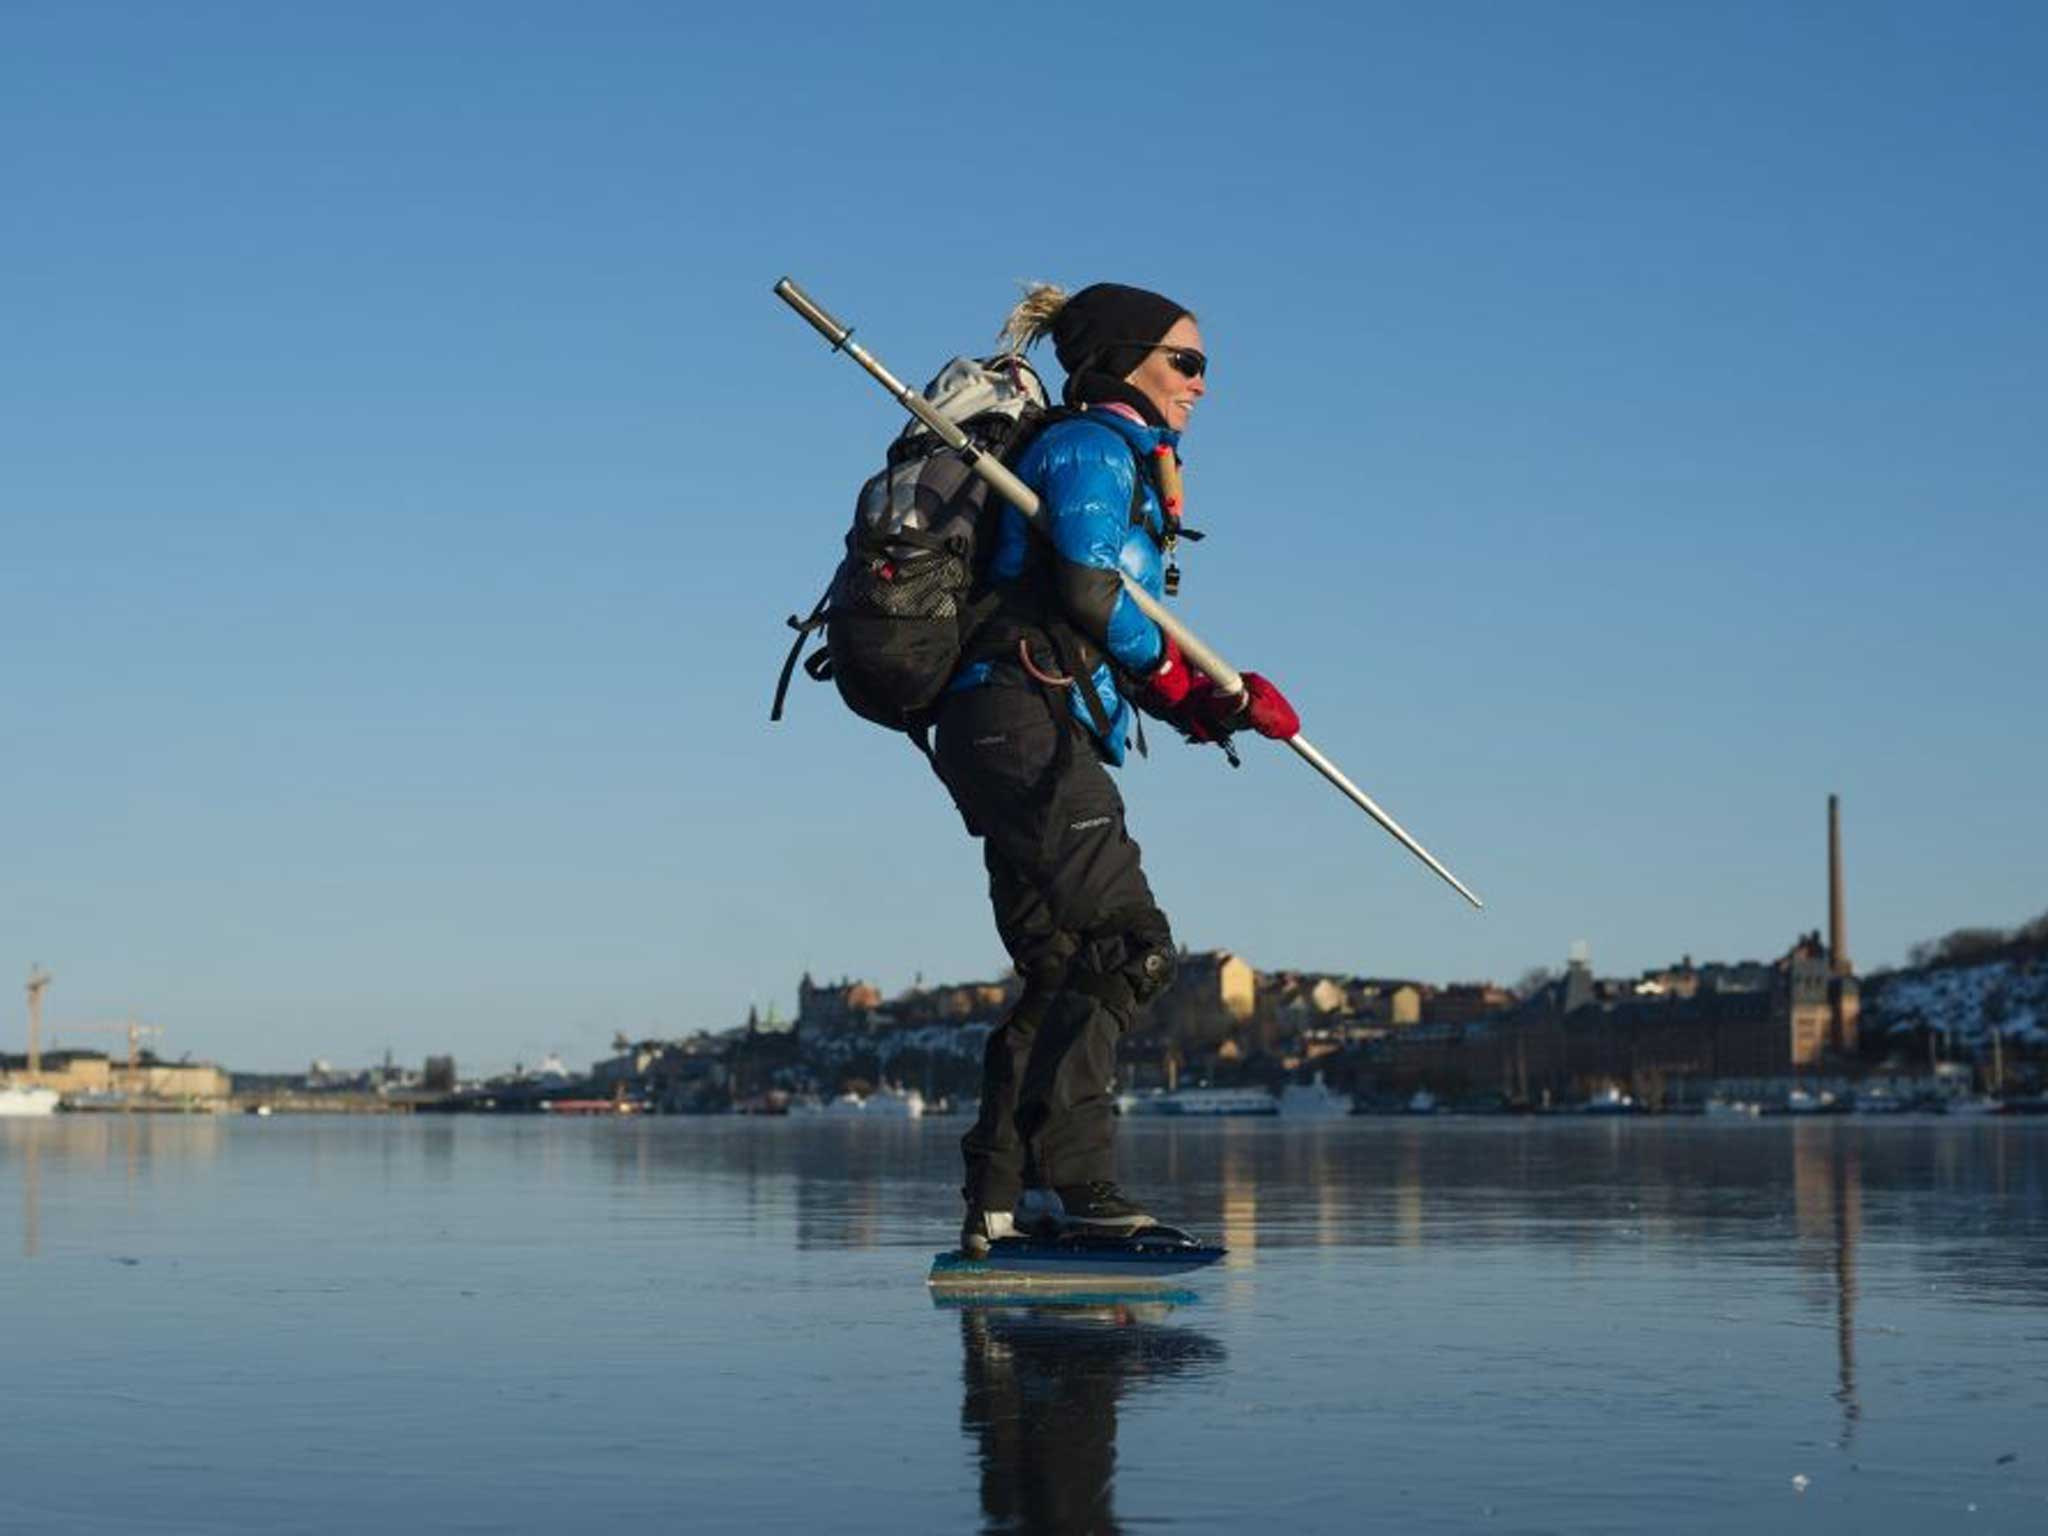 Walk on water: Ice skating on a frozen bay off Sweden’s coast